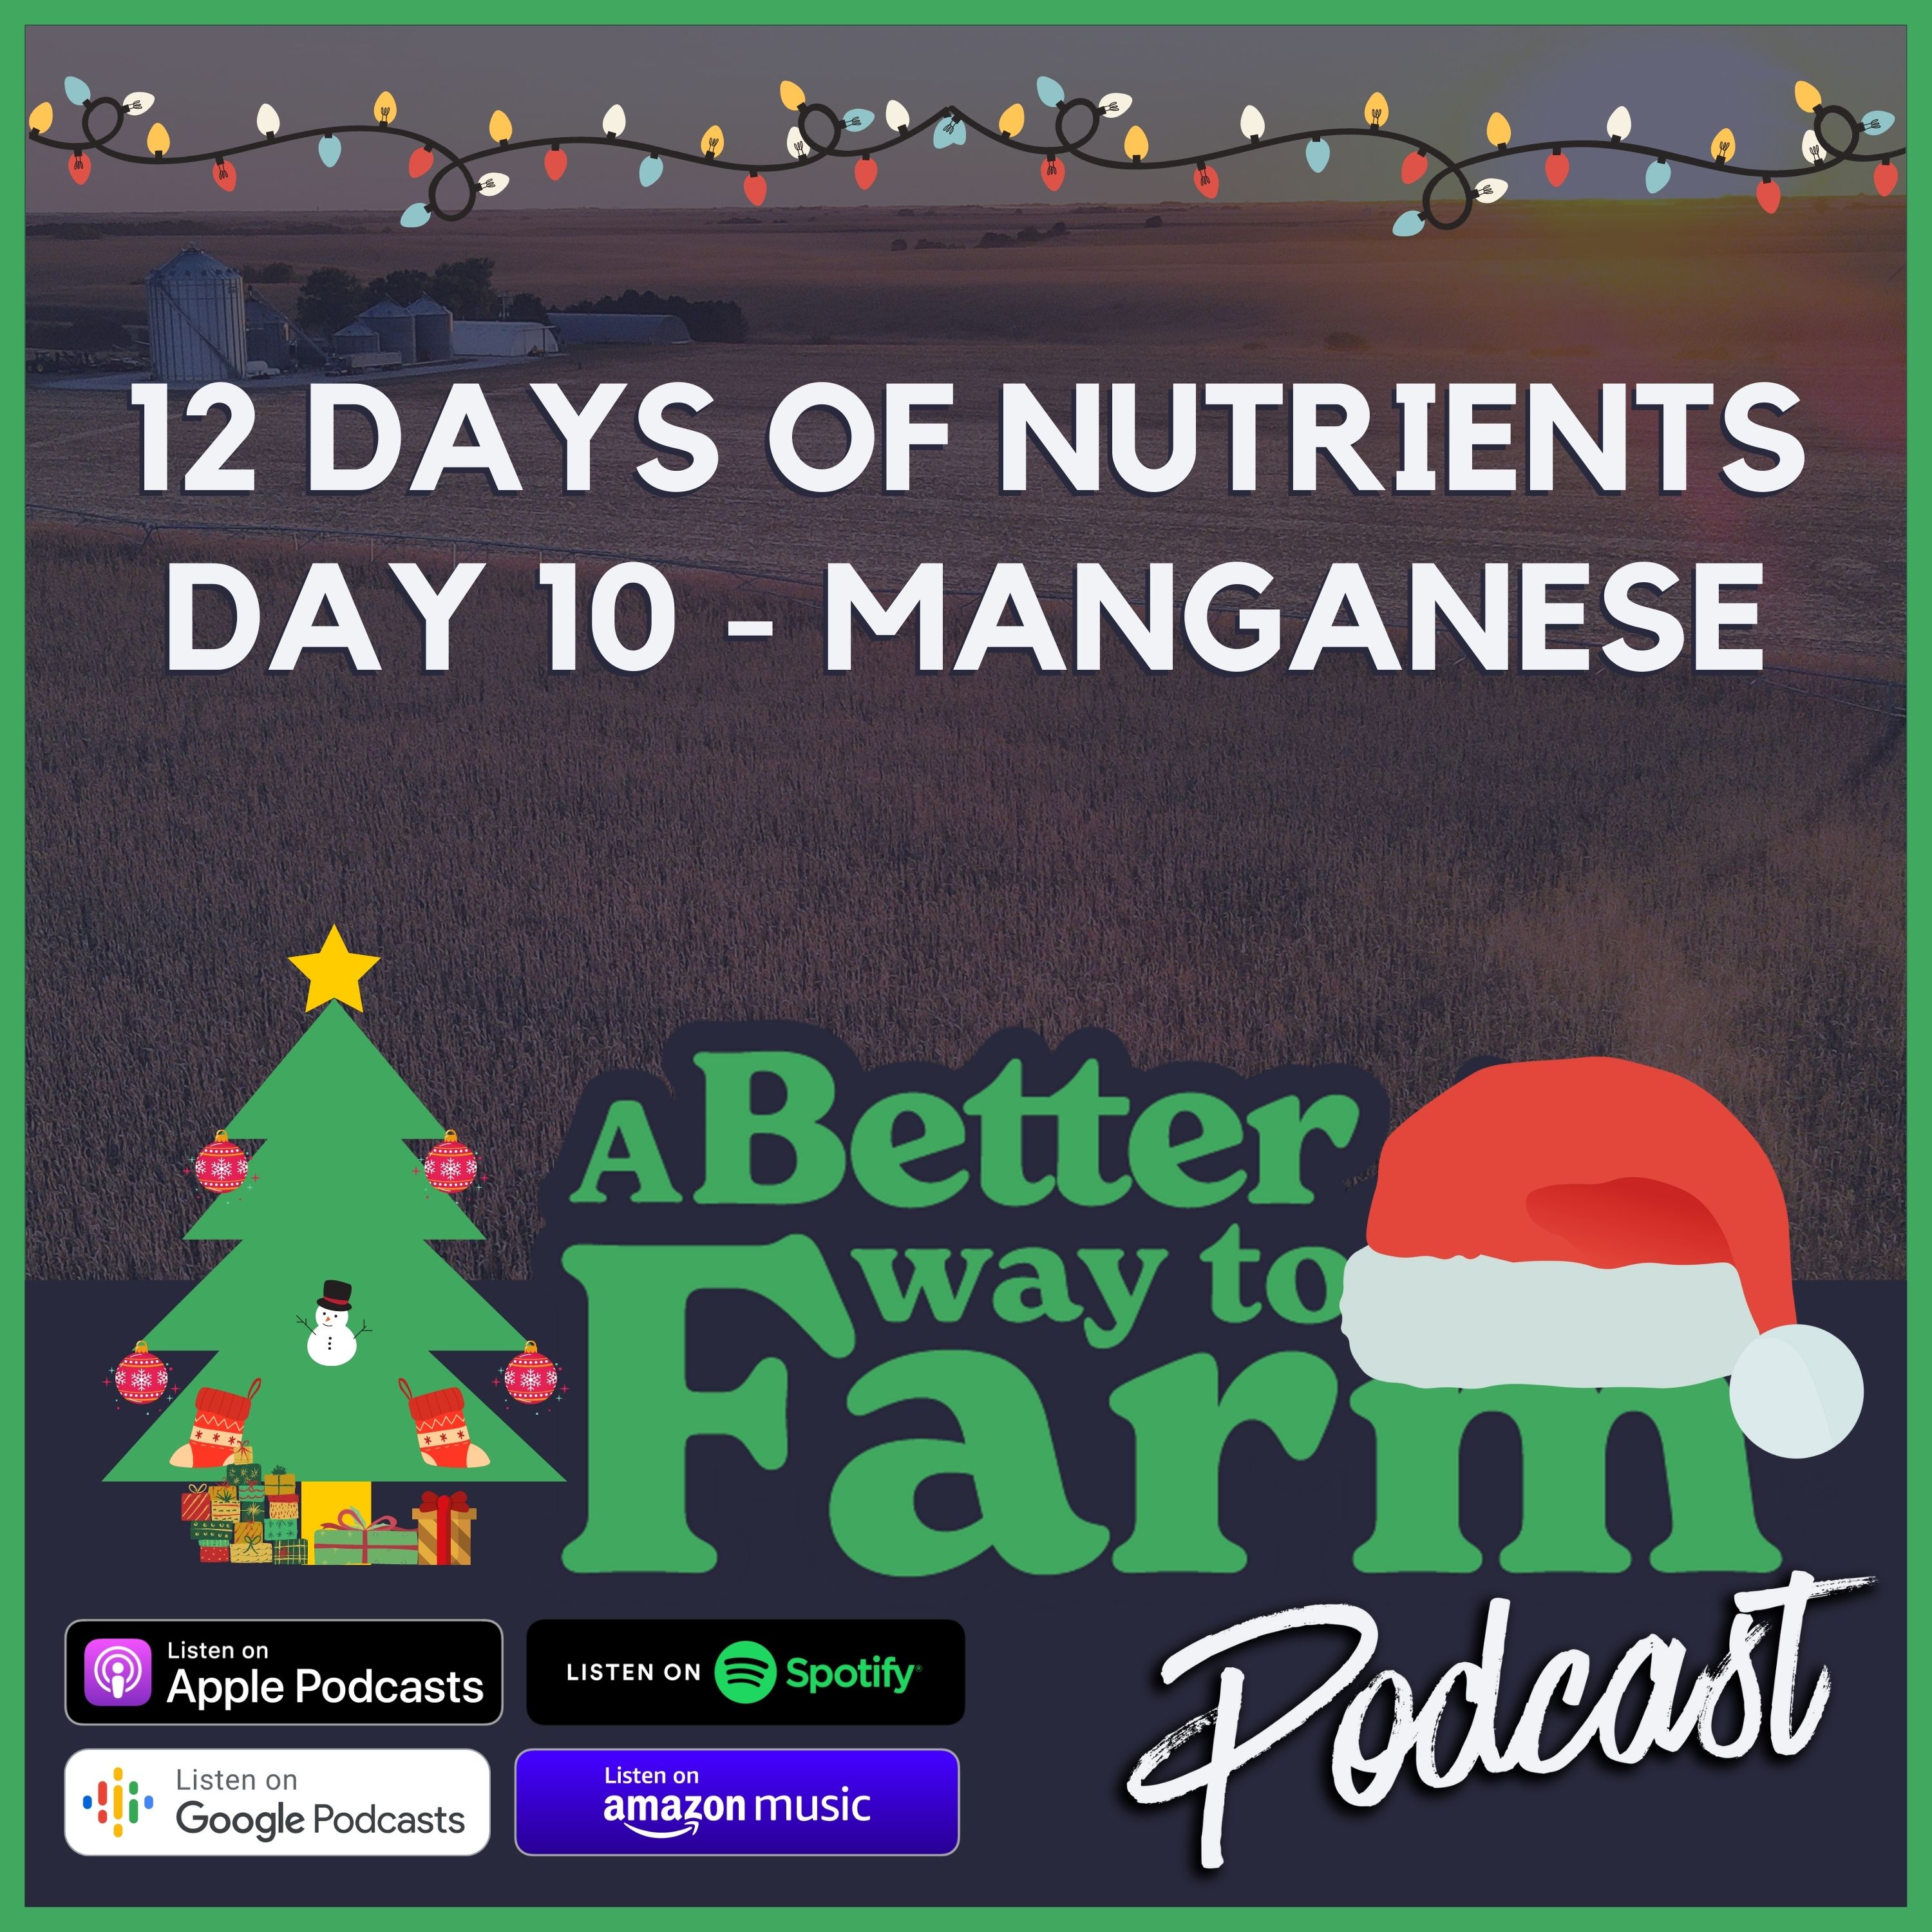 12 Days of Nutrients: Day 10 - Manganese